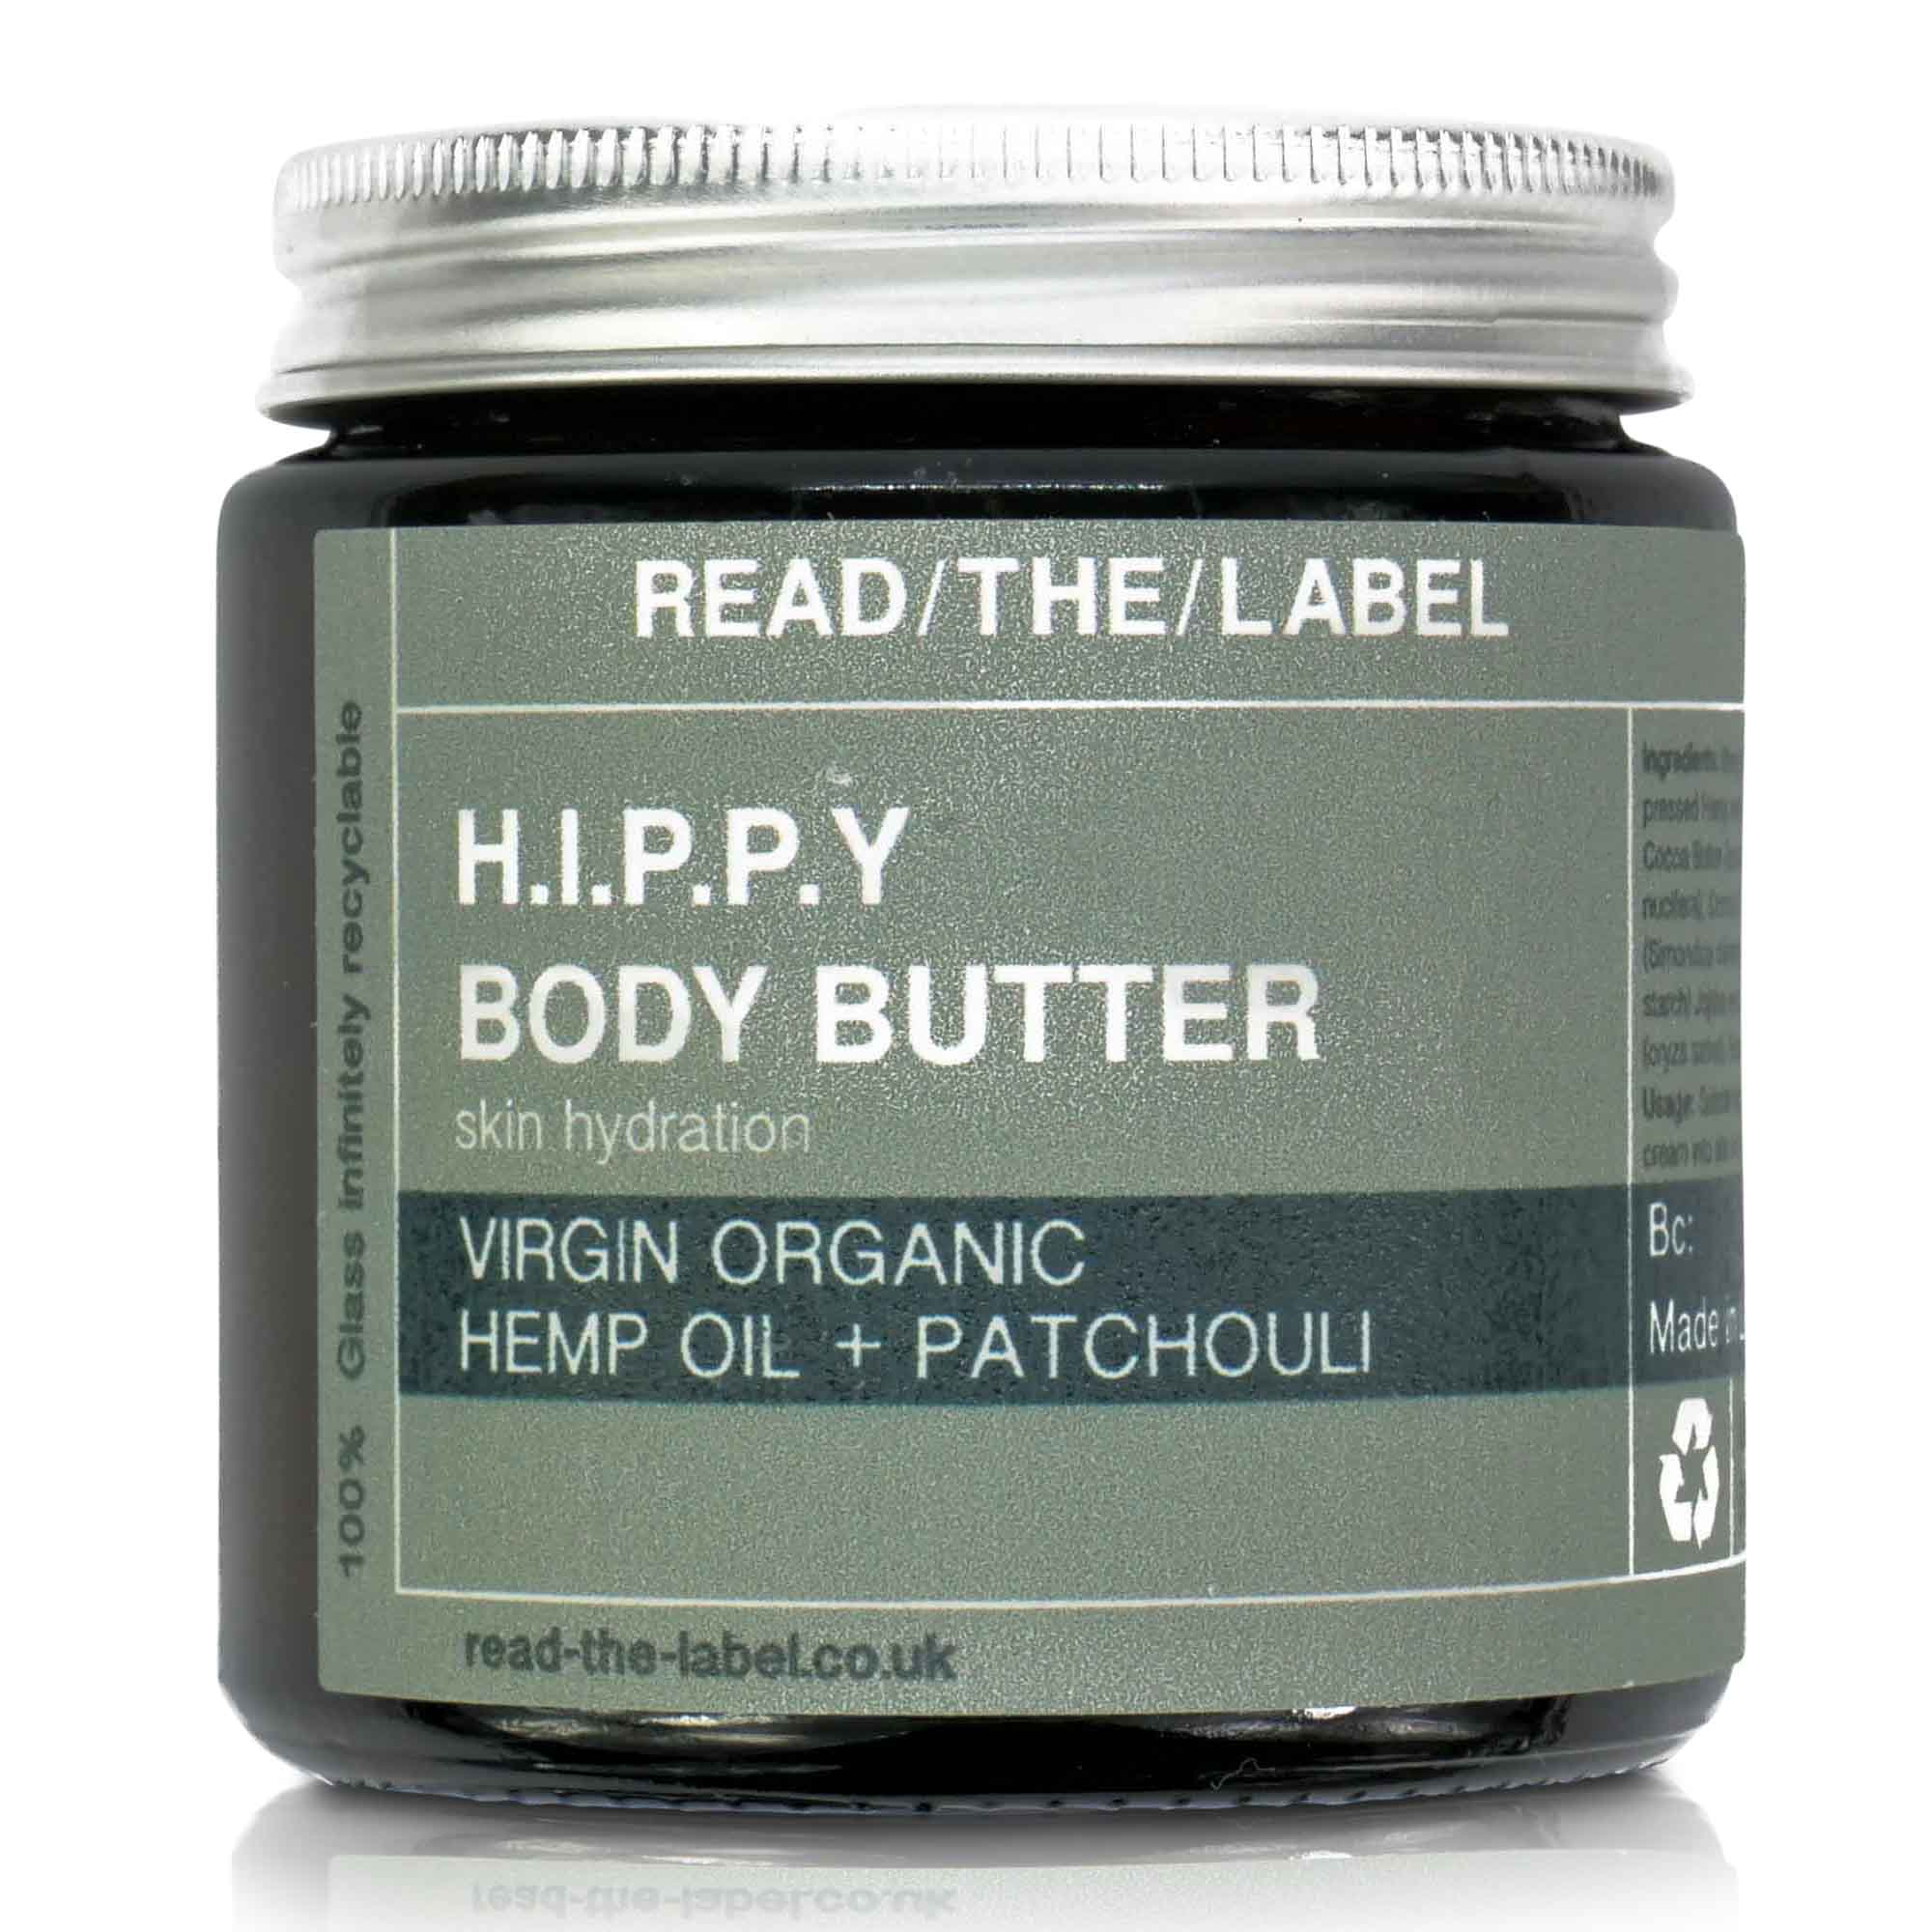 H I P P Y Body Butter 100g Read The Label